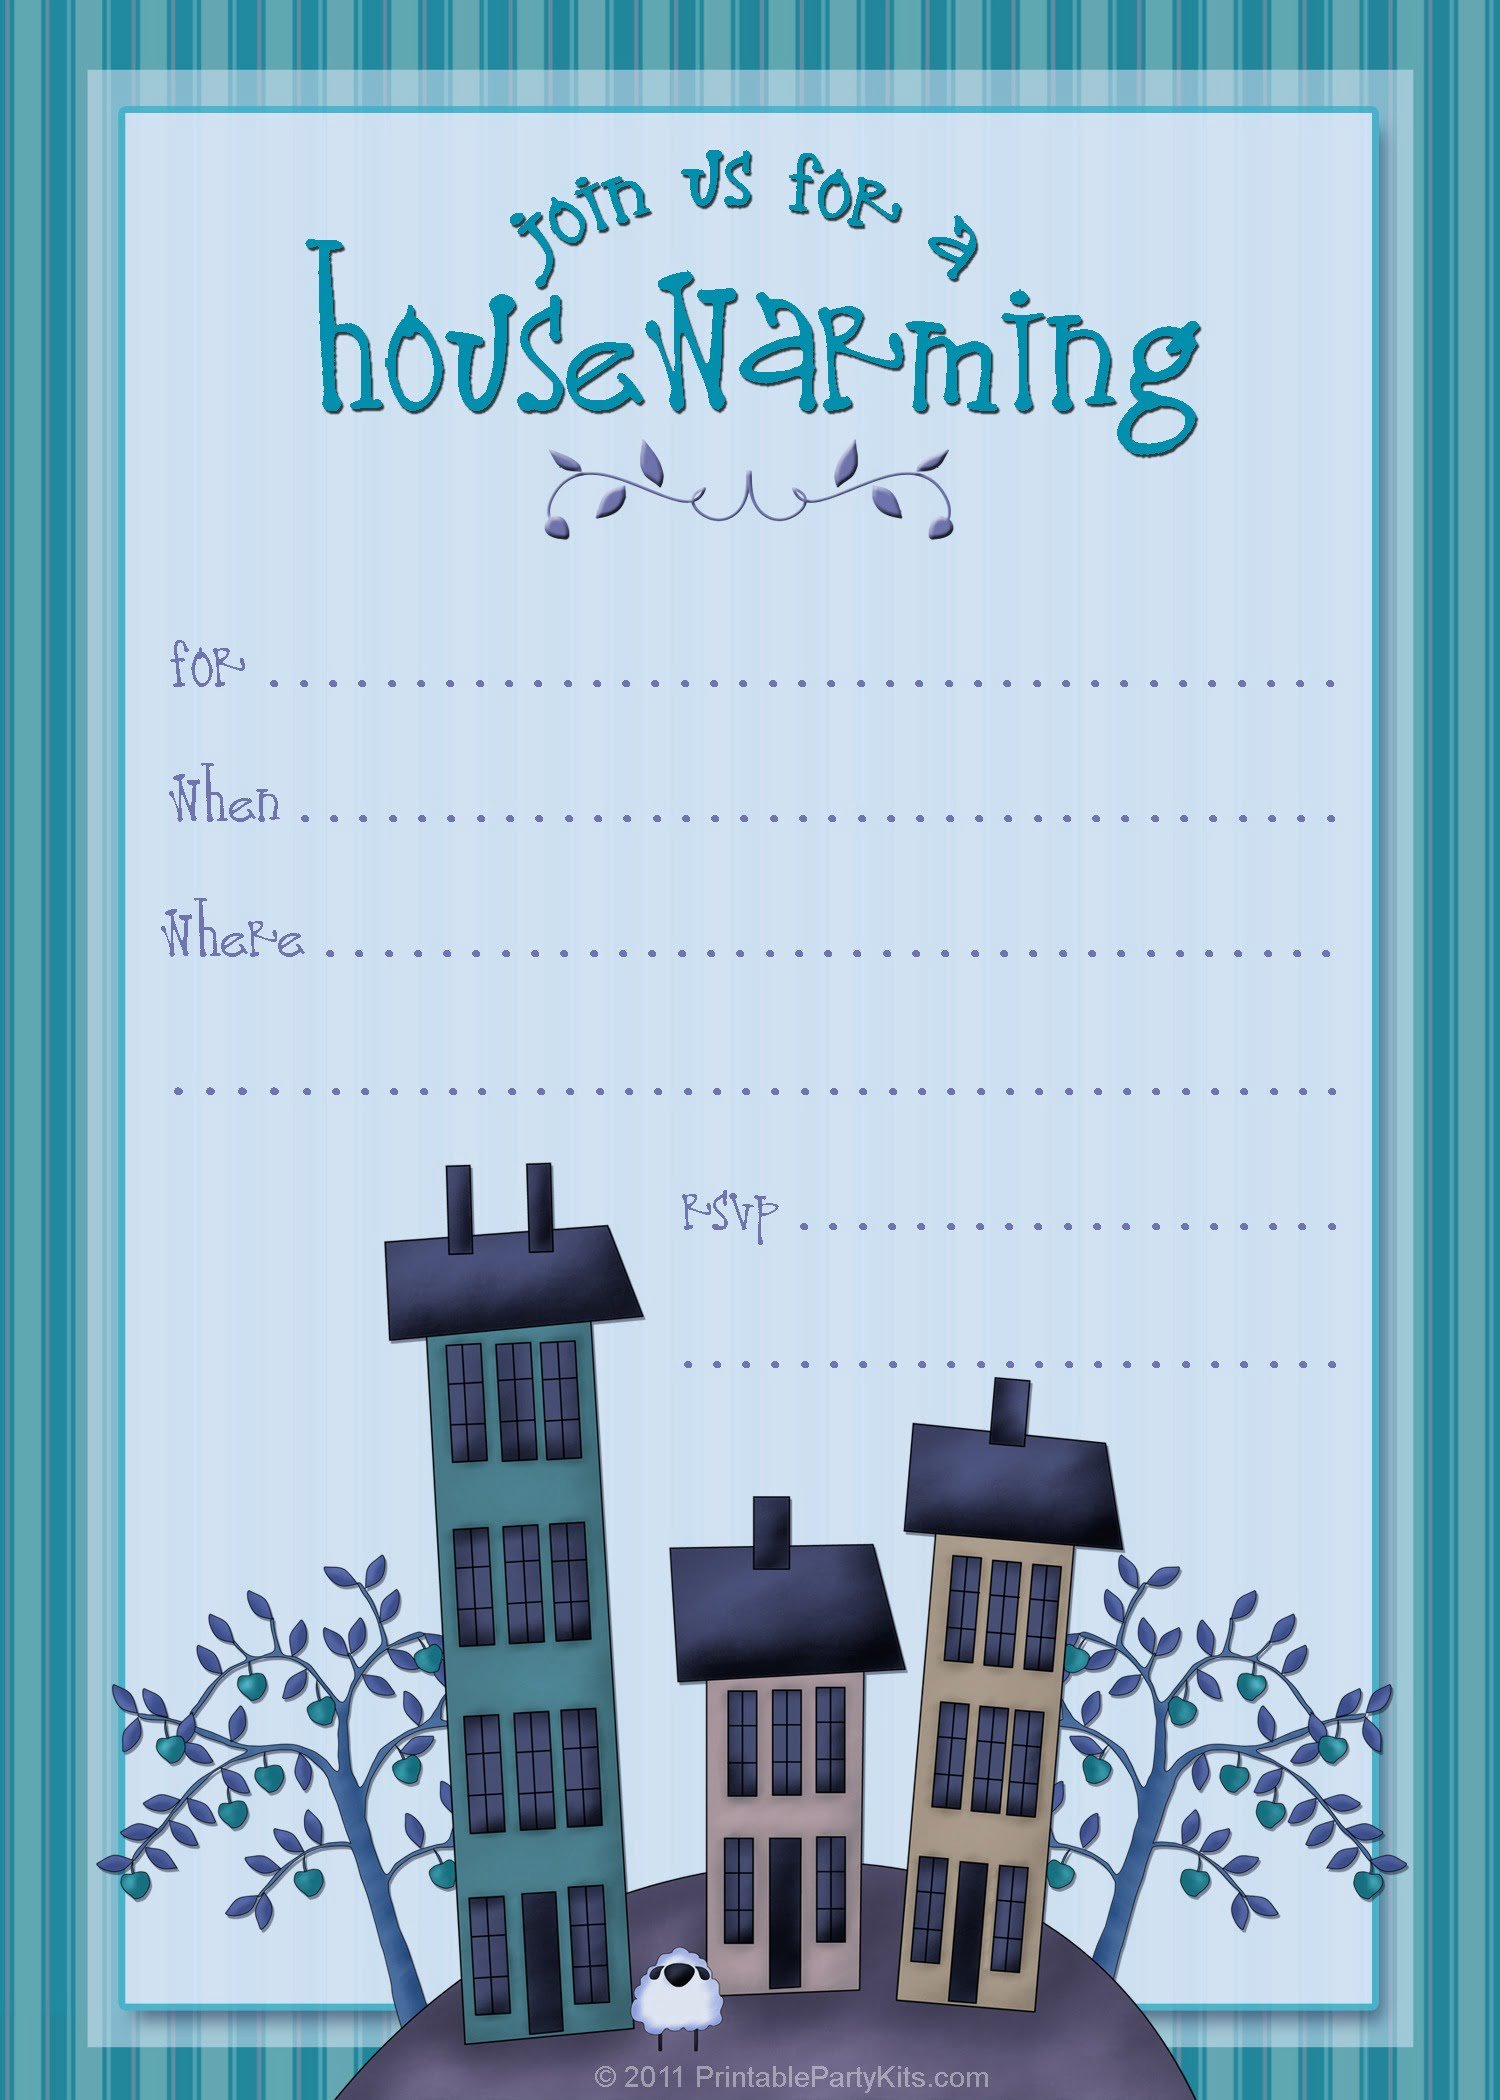 Free Housewarming Invitations To Inspire You On How To Make Your